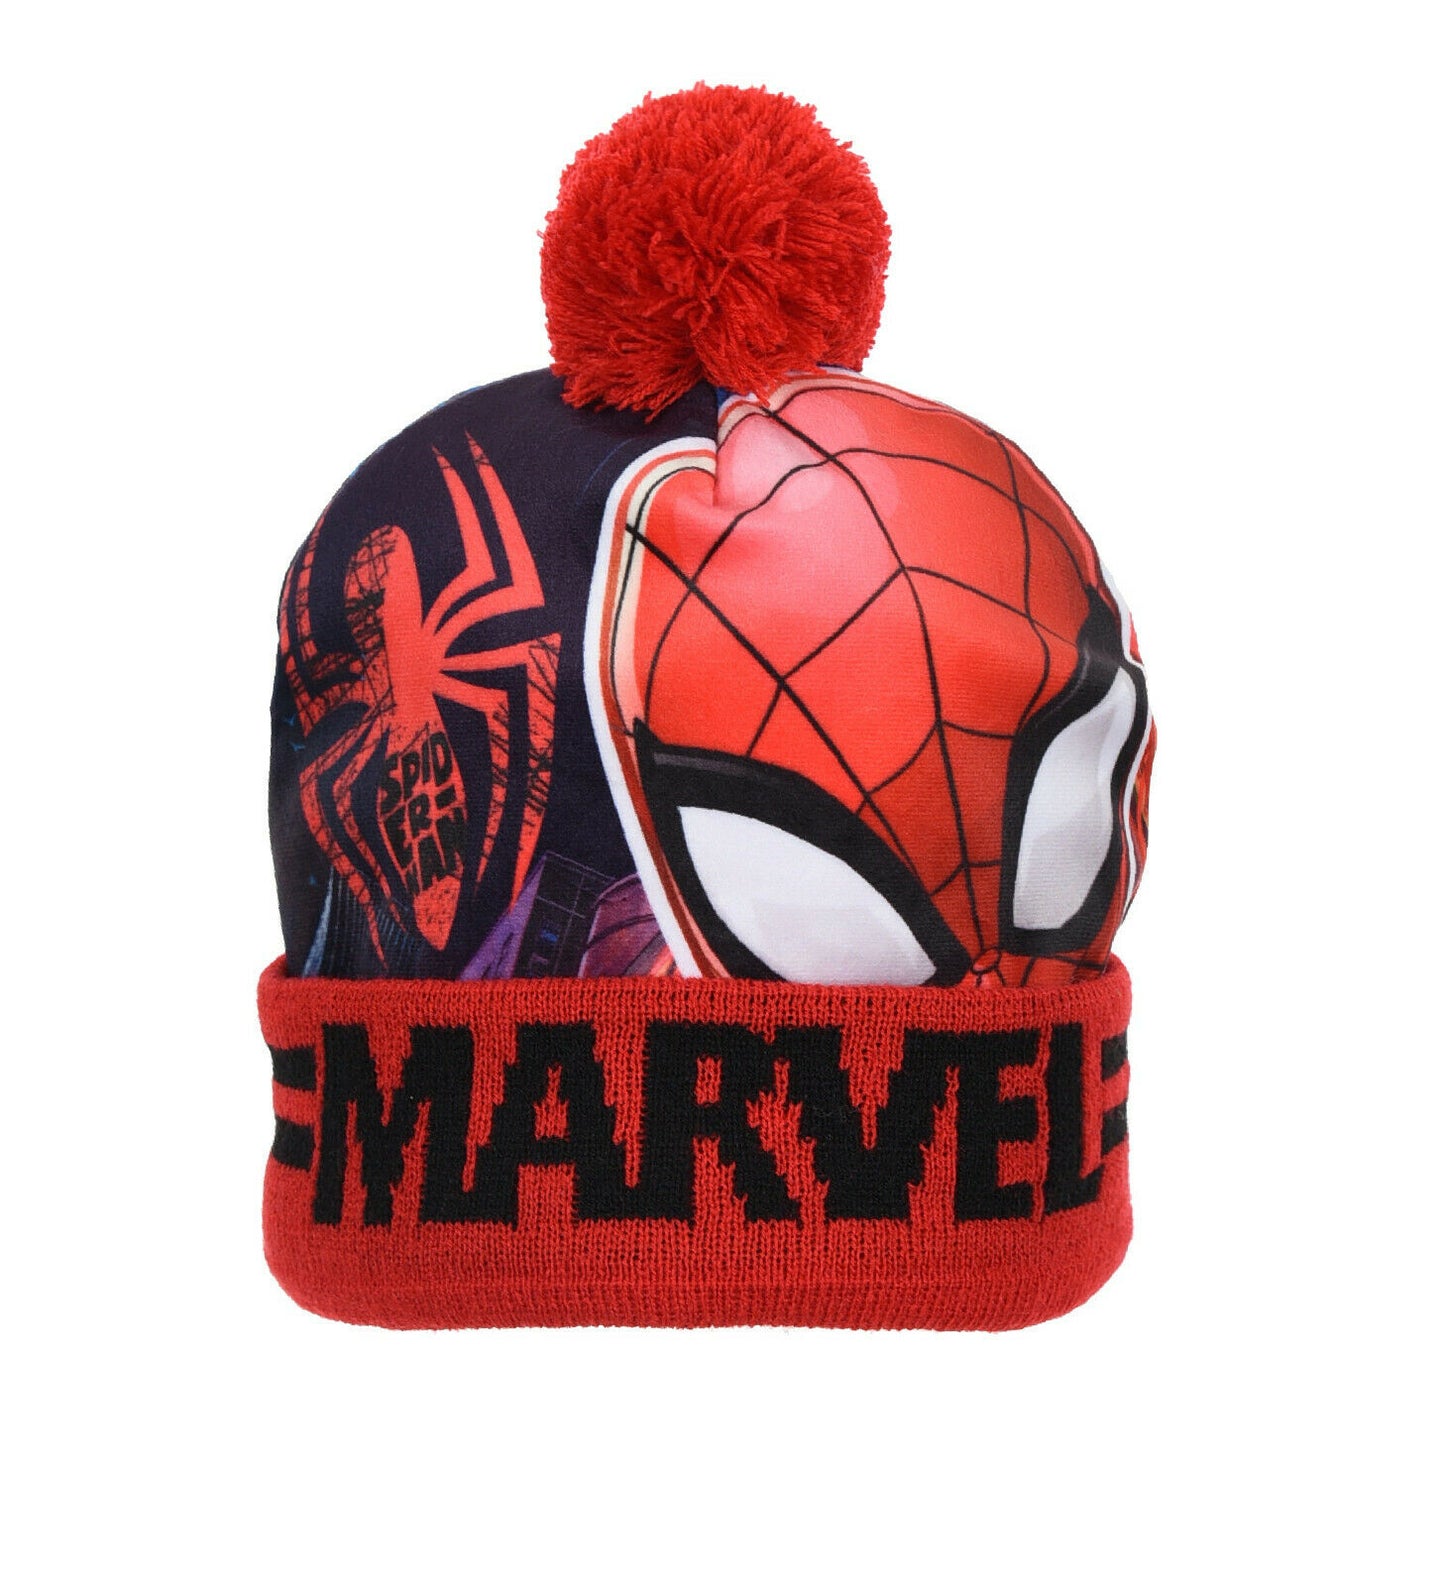 Spiderman Beanie Hat In Red. Perfect For The Winter Months.